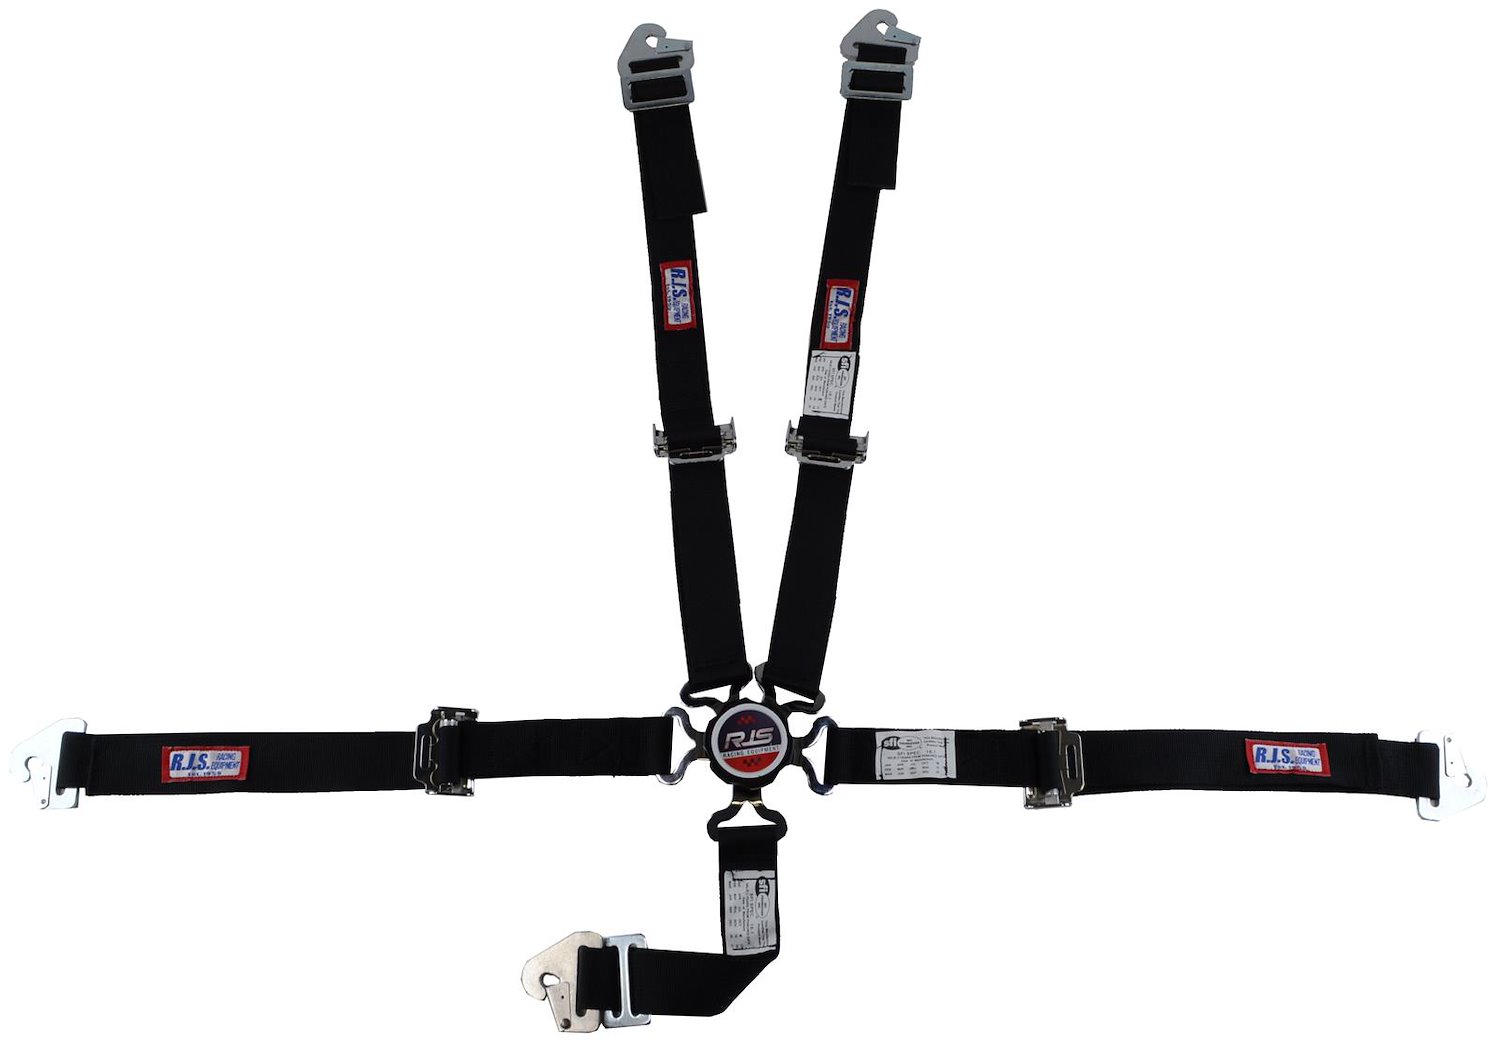 SFI 16.1 CAM-LOCK HARNESS 2 PULL UP Lap Belt 2 Shoulder Harness V ROLL BAR Mount 2 DOUBLE Sub ALL SNAP ENDS BLUE